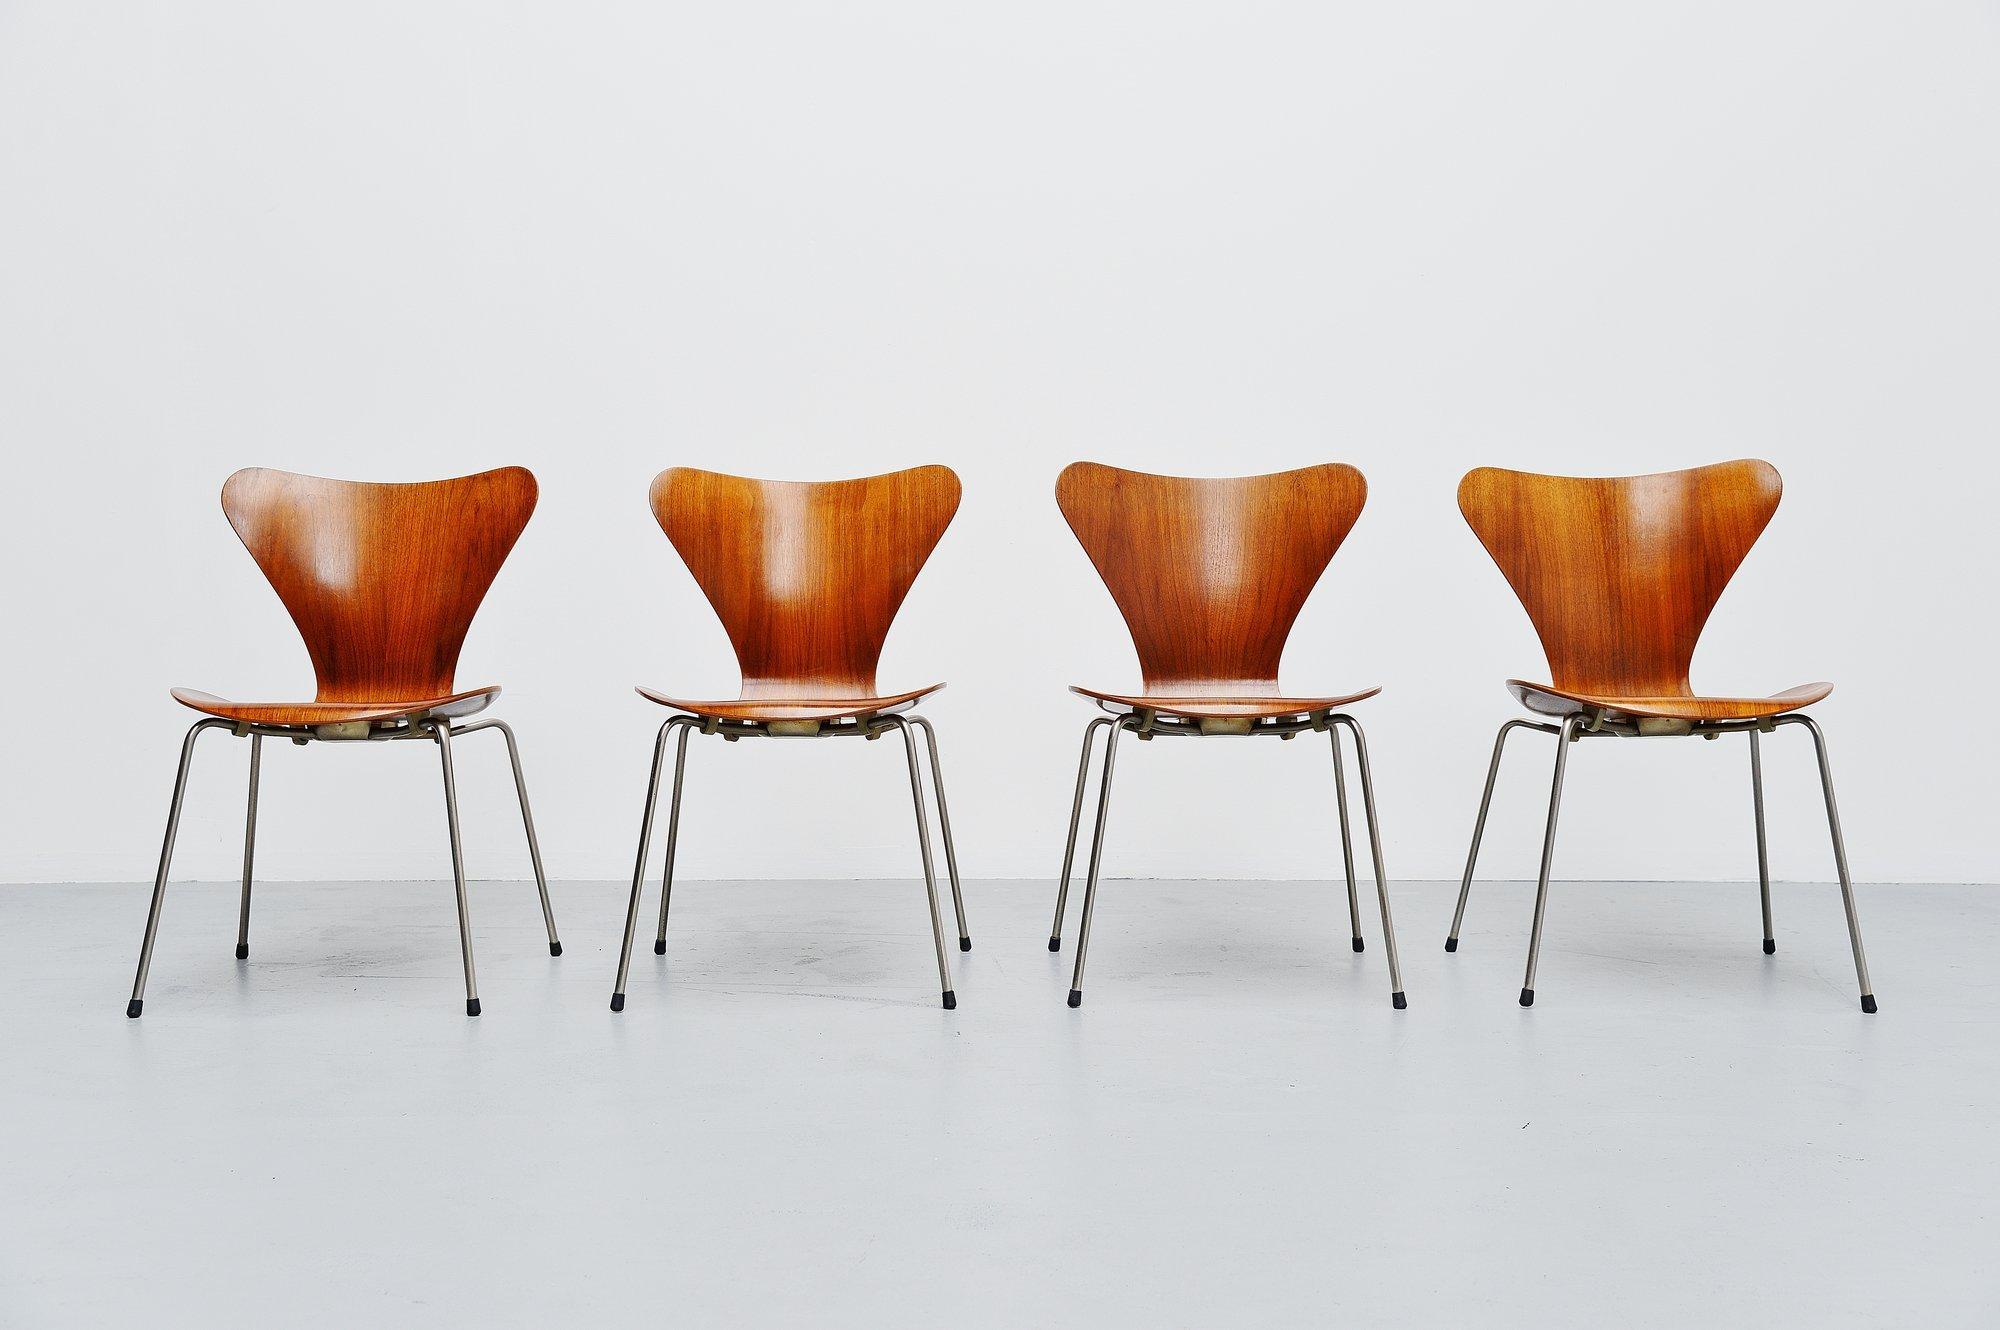 Iconic set of four so called butterfly chairs model 3107 from the 7 series designed by Arne Jacobsen and manufactured by Fritz Hansen, Denmark 1955. This is for a set of four early chairs from the first production in the 1950s in very nice teak